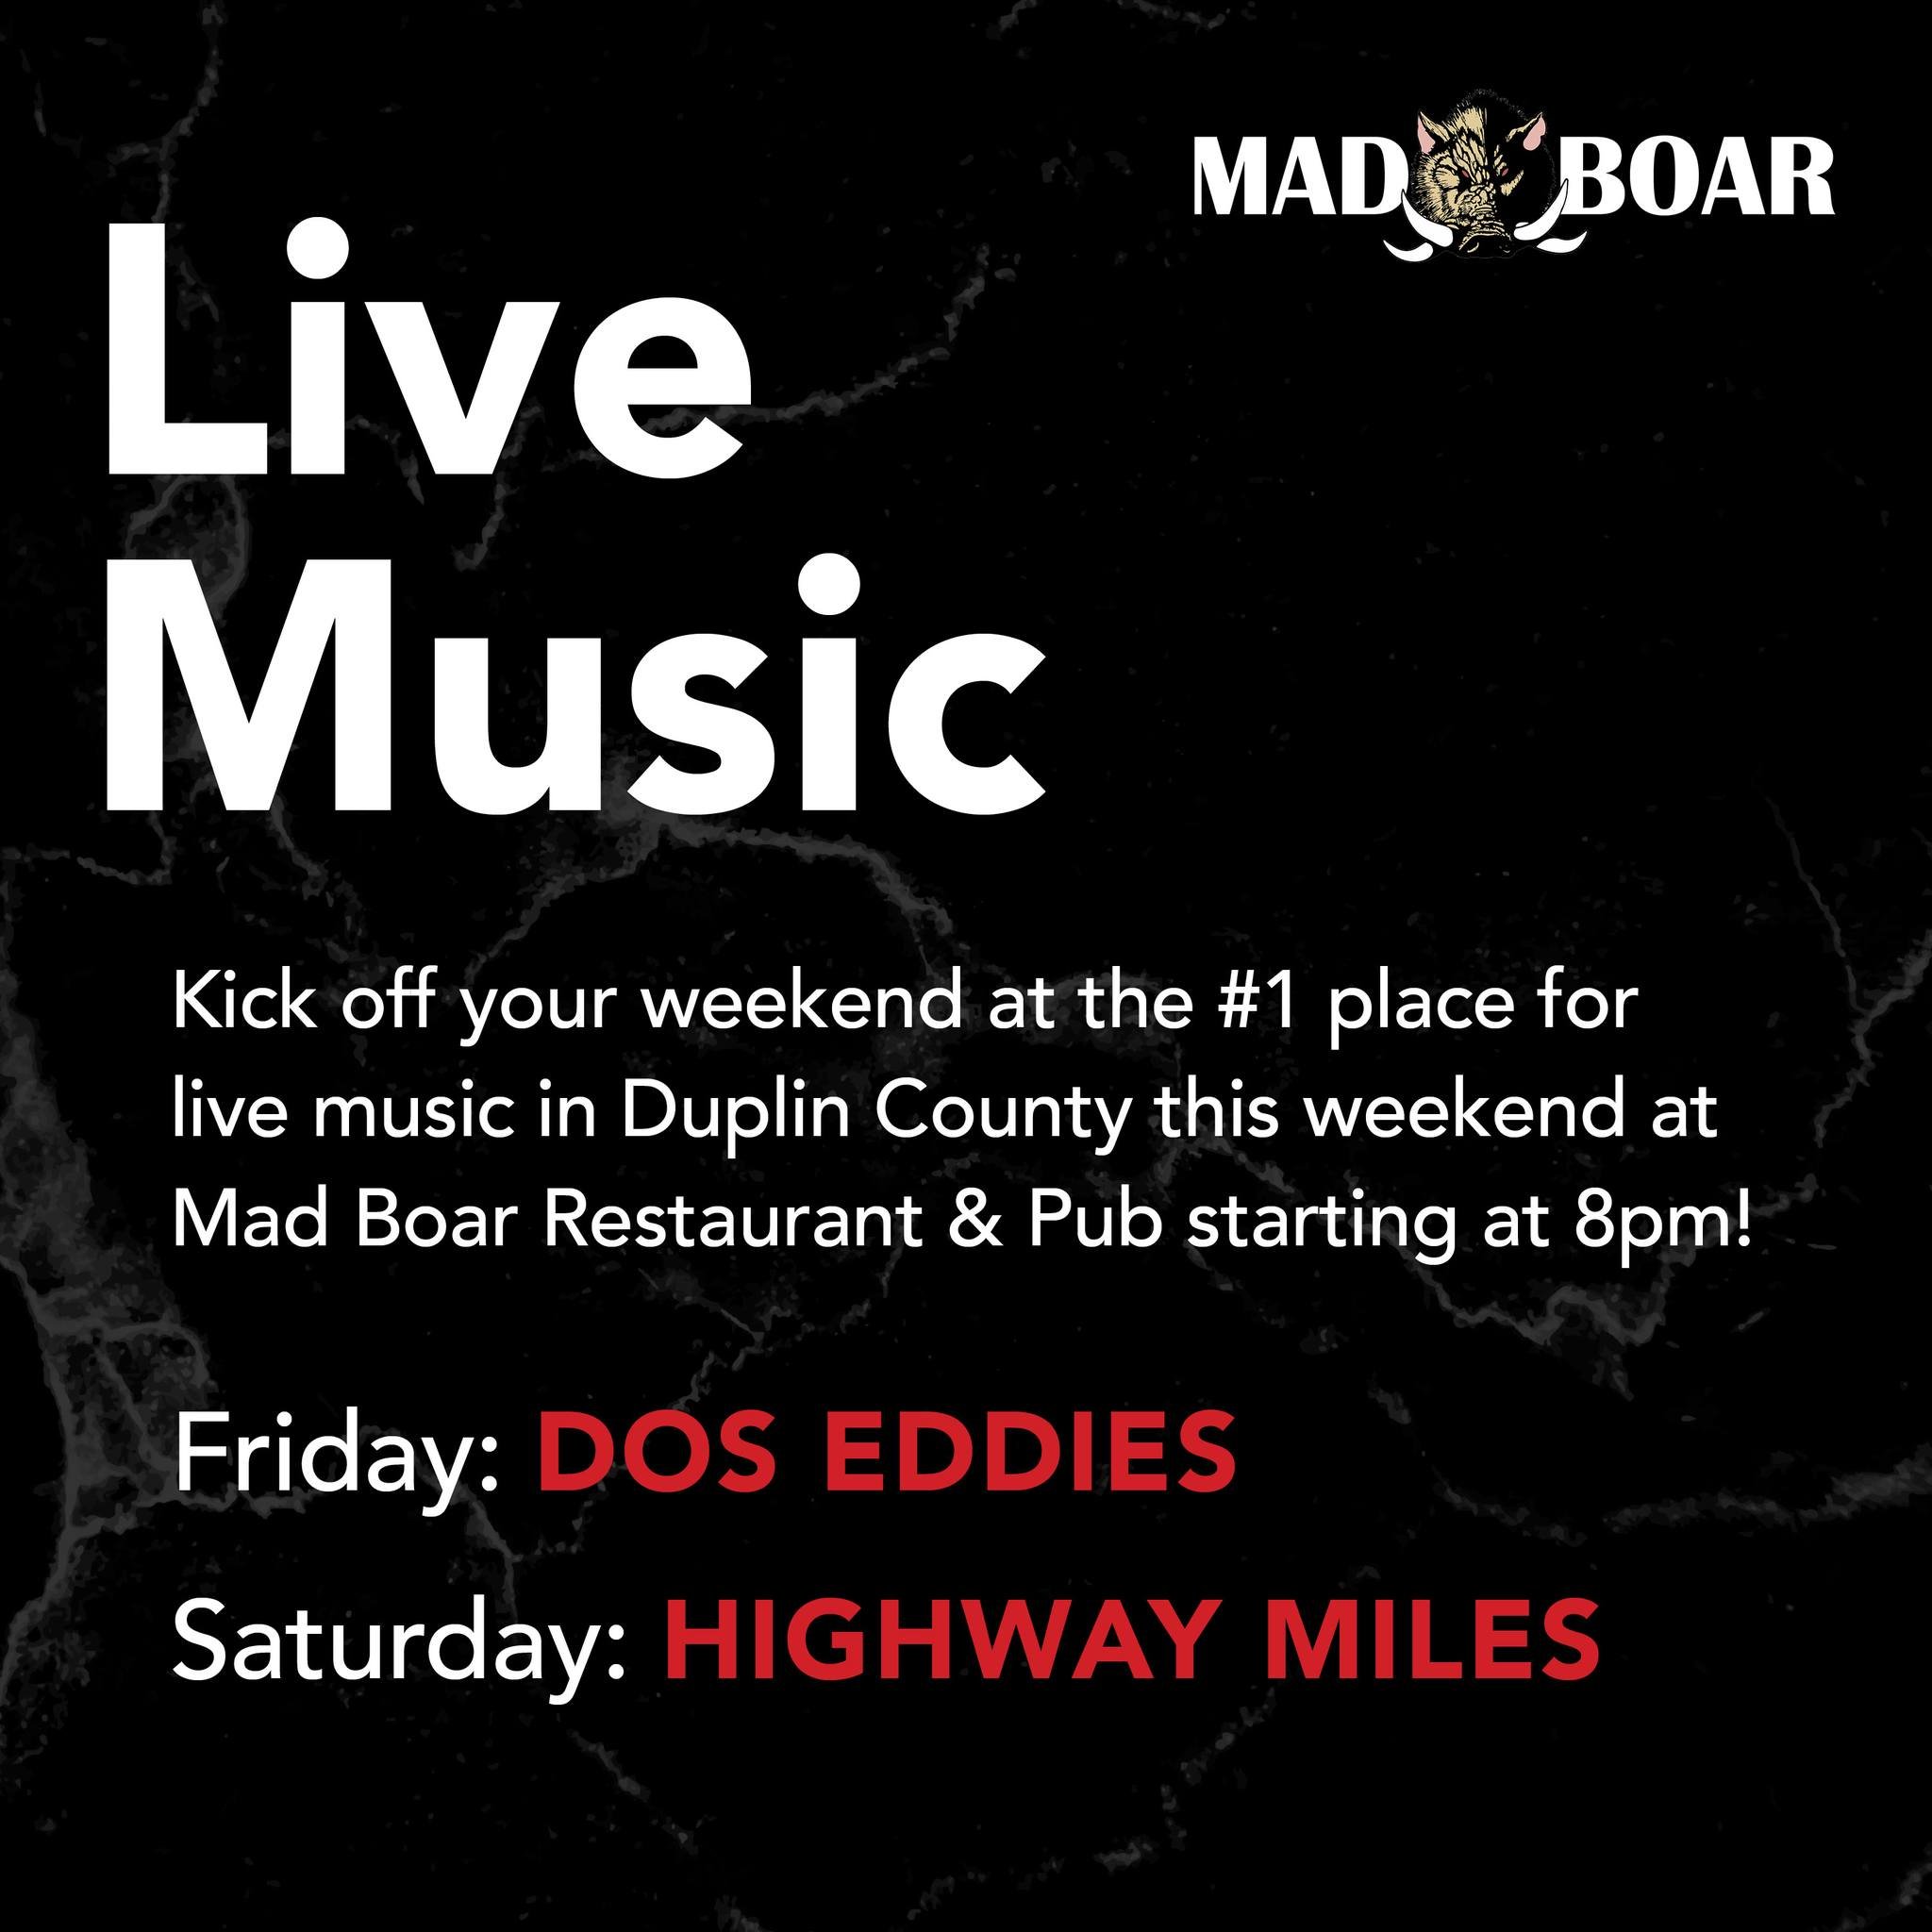 Looking for some live music excitement? 🎤 Mad Boar has you covered! Join us for Dos Eddies on Friday and Highway Miles on Saturday, starting at 8pm.

#livemusic #supportlocalmusic #localband #madboarnc #wallacenc #music #livemusicvenue